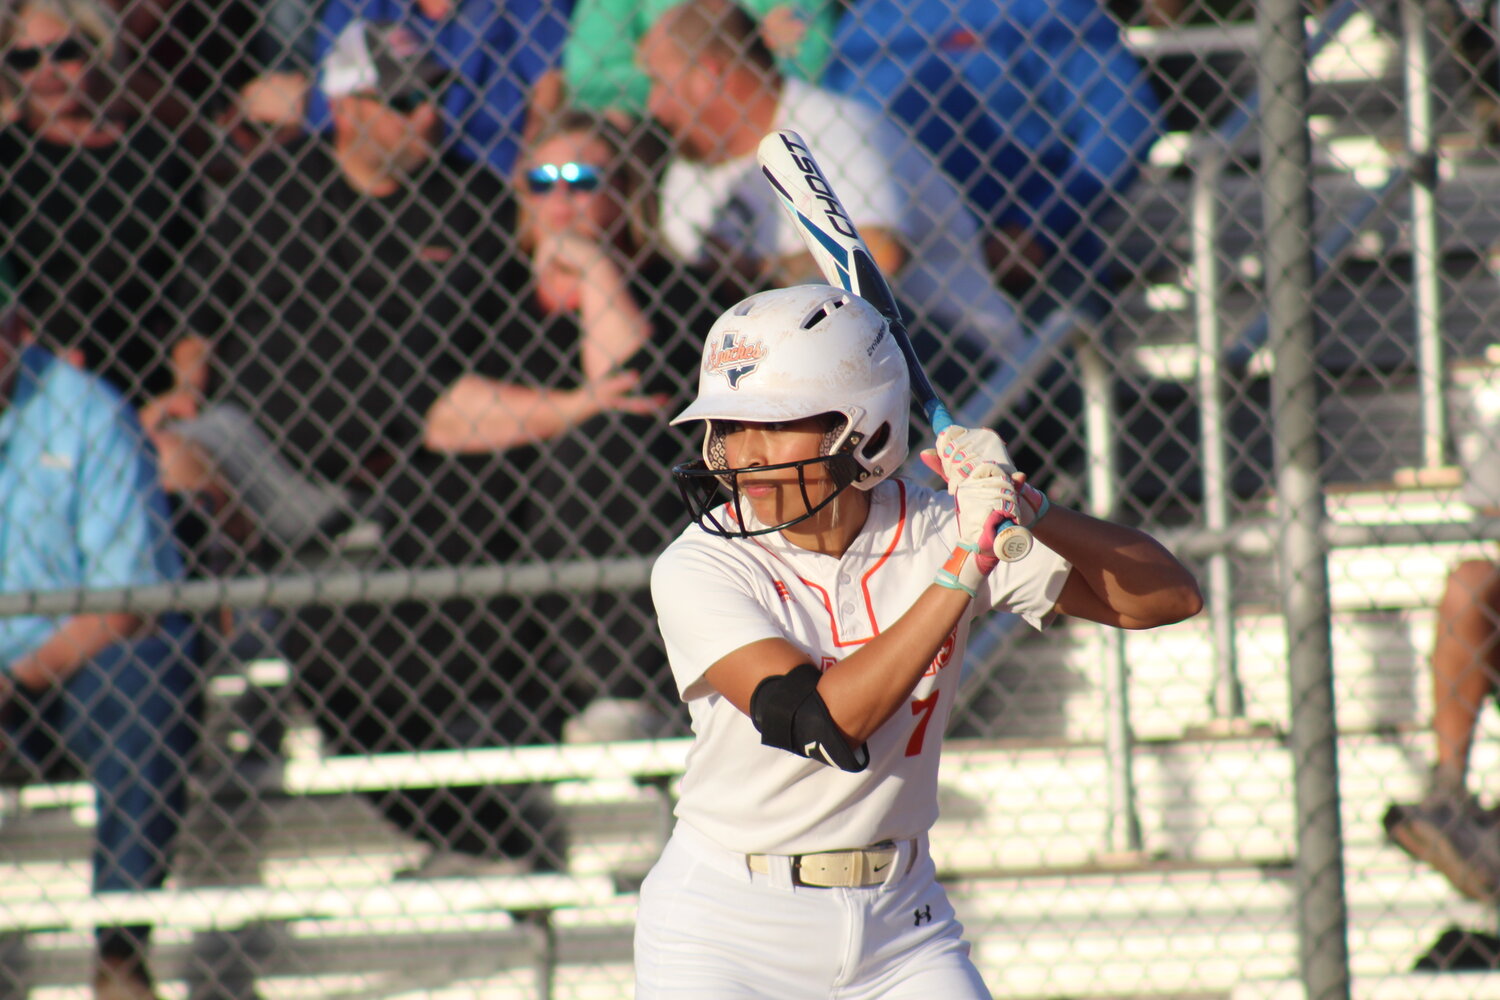 Lady Apaches junior center fielder Sarah Padilla (7) at bat for Gonzales against Cuero Monday, March 25.